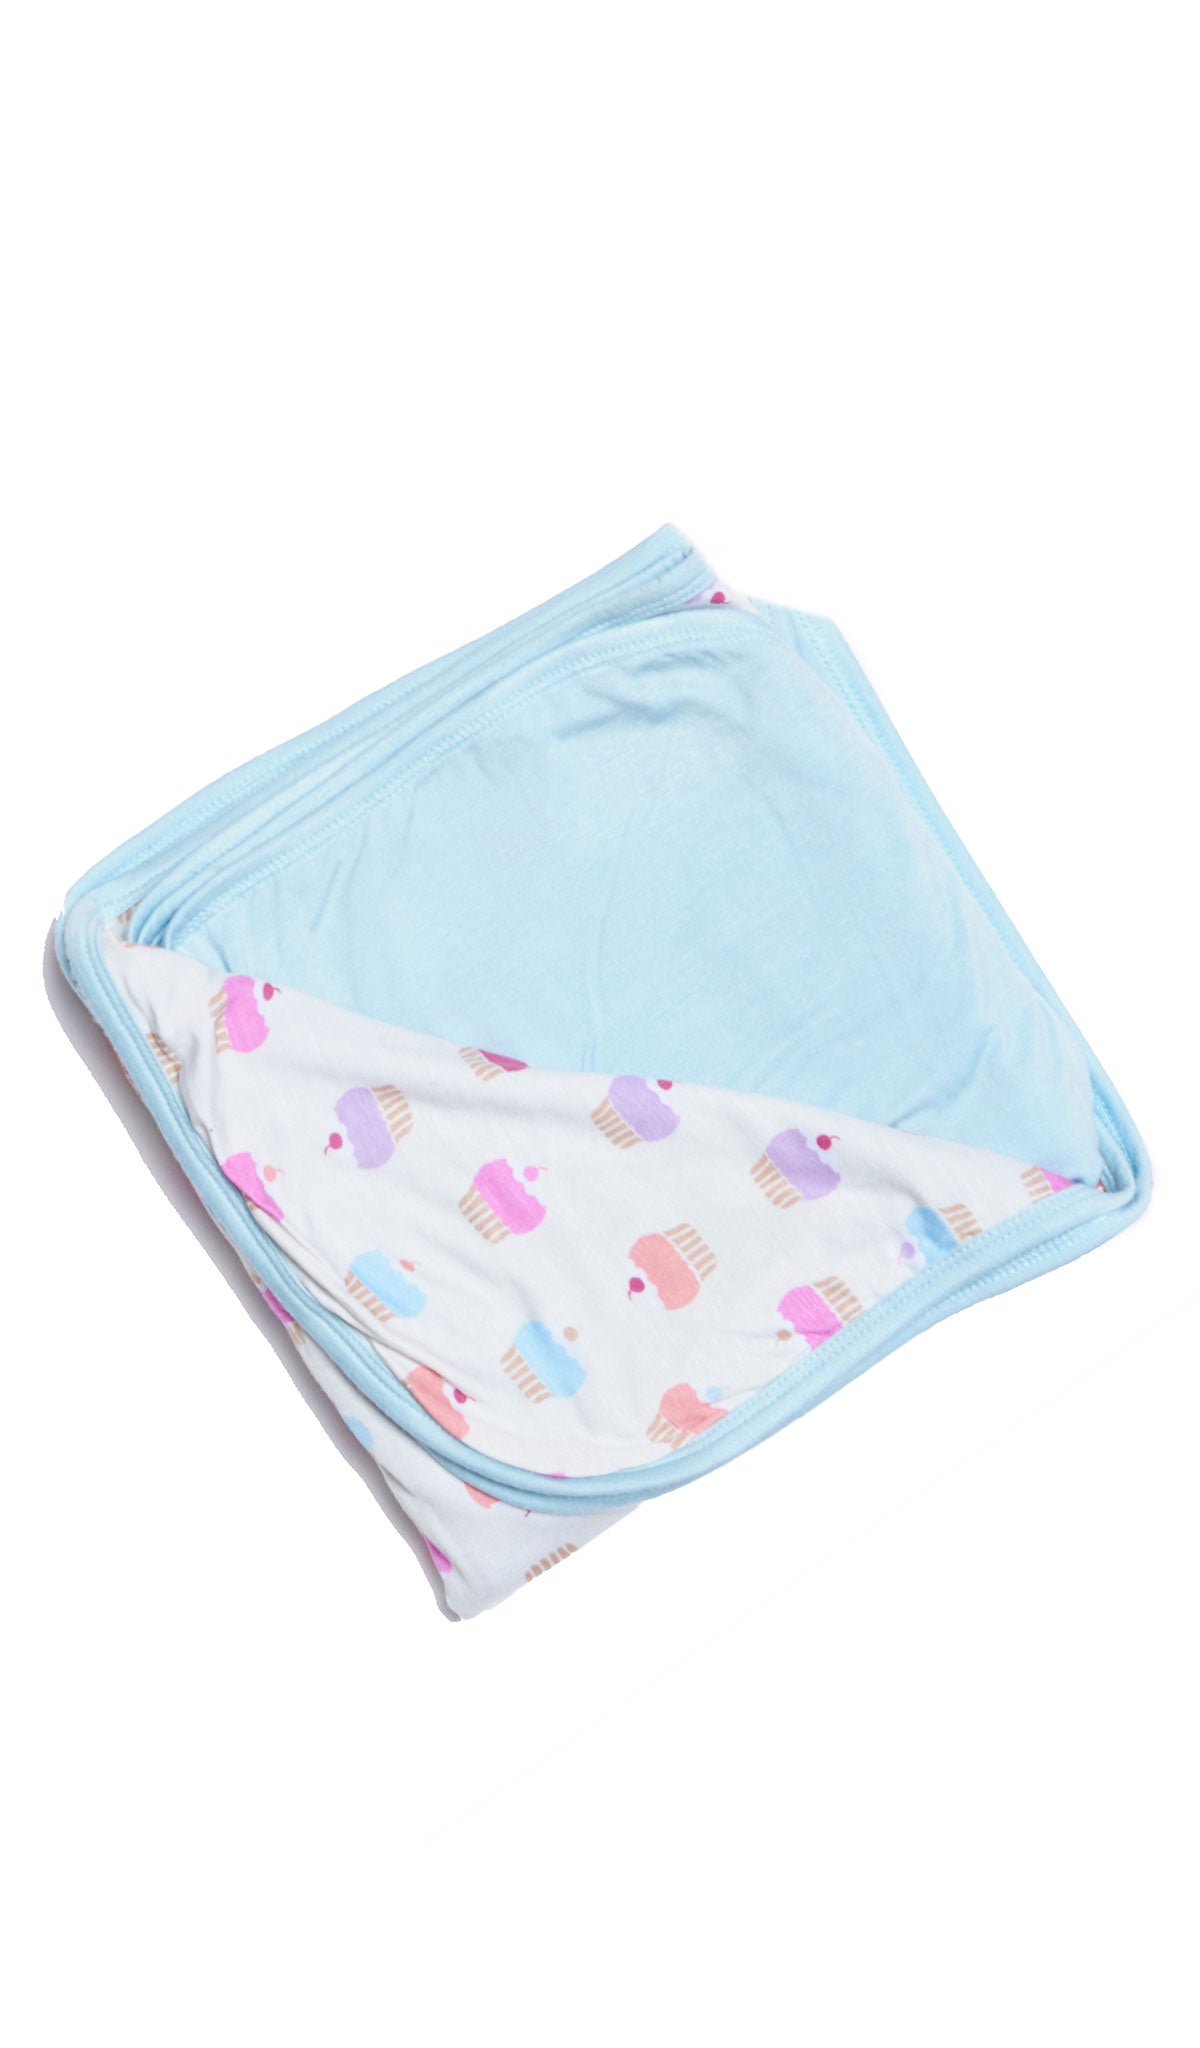 Cupcakes Swaddle Blanket folded into a square with print showing on one side and reversible contrast solid showing on other side of fold down flap.